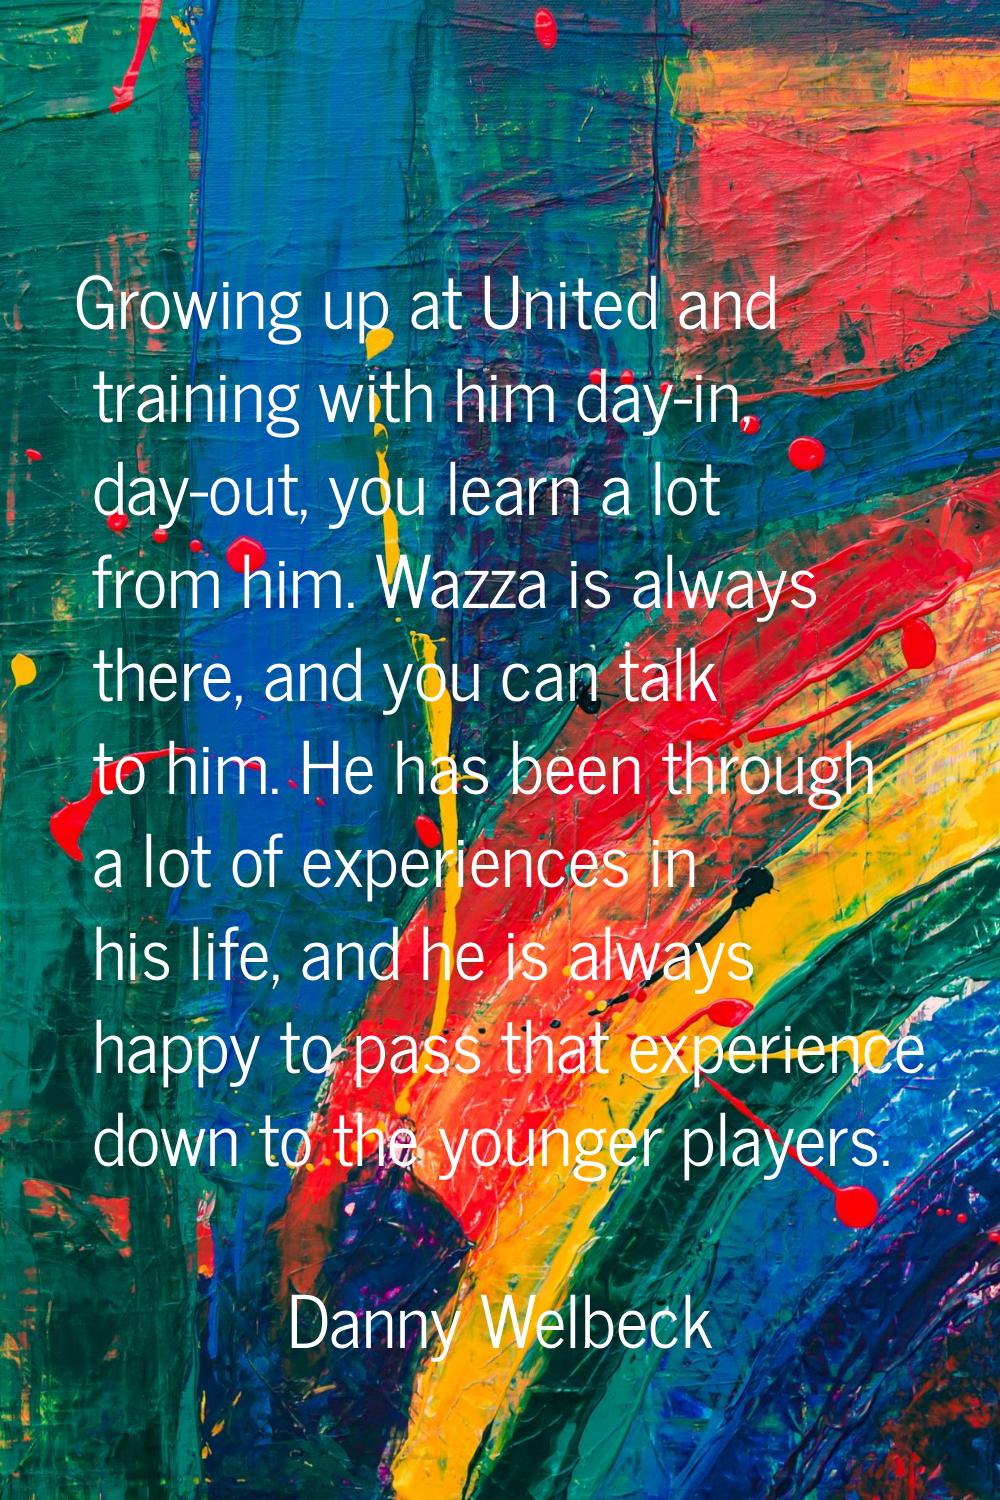 Growing up at United and training with him day-in, day-out, you learn a lot from him. Wazza is alwa